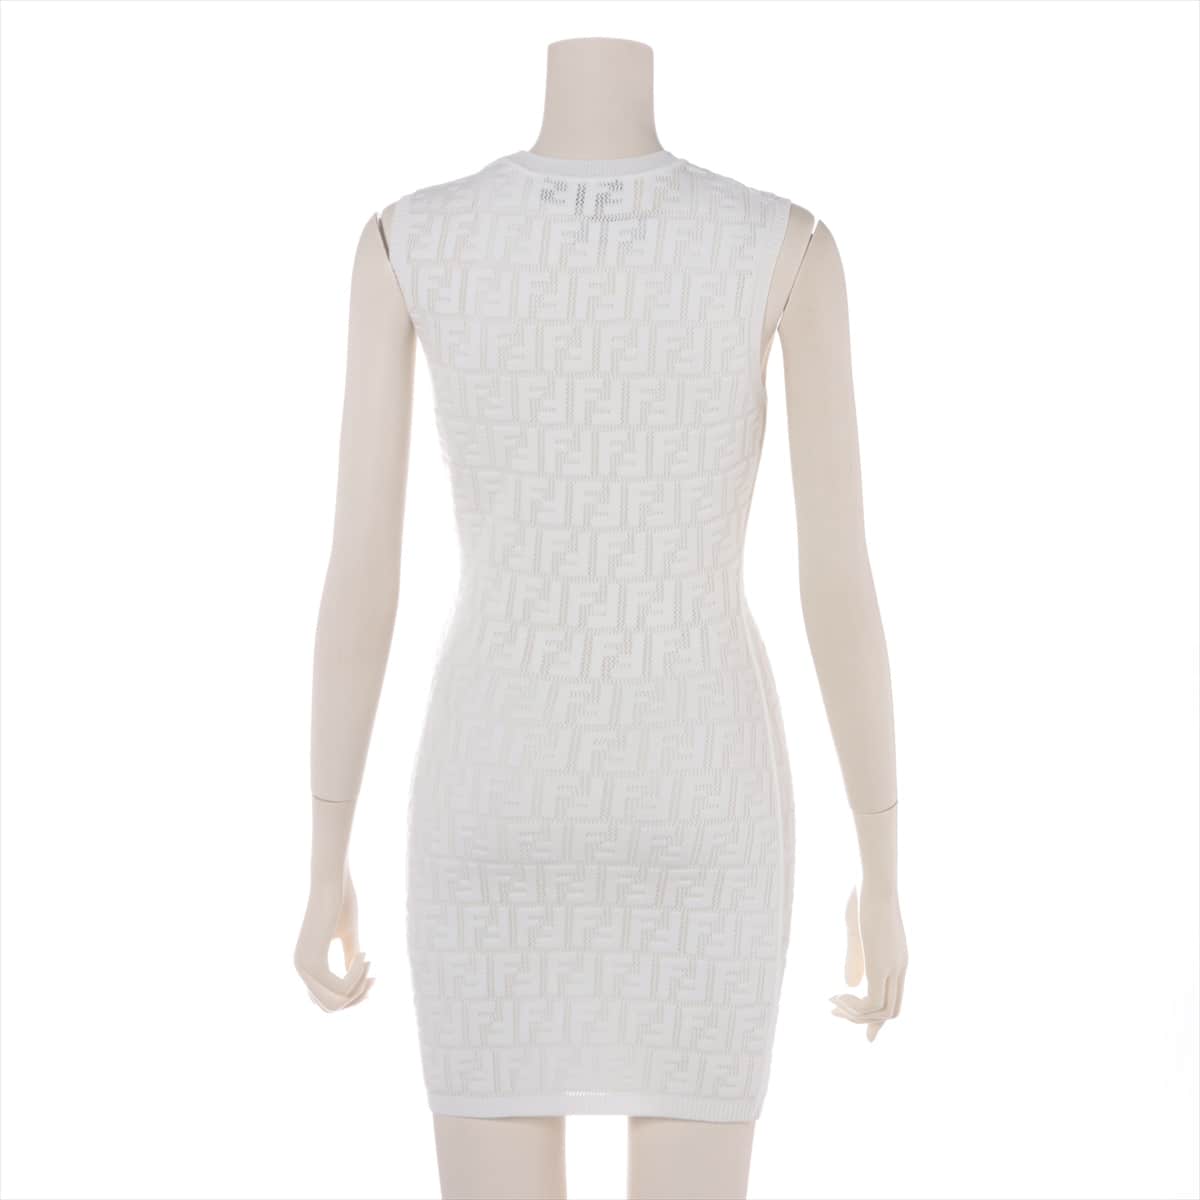 Fendi ZUCCa 22 years Polyester × Rayon Knit dress 36 Ladies' White  Sleeveless With inner